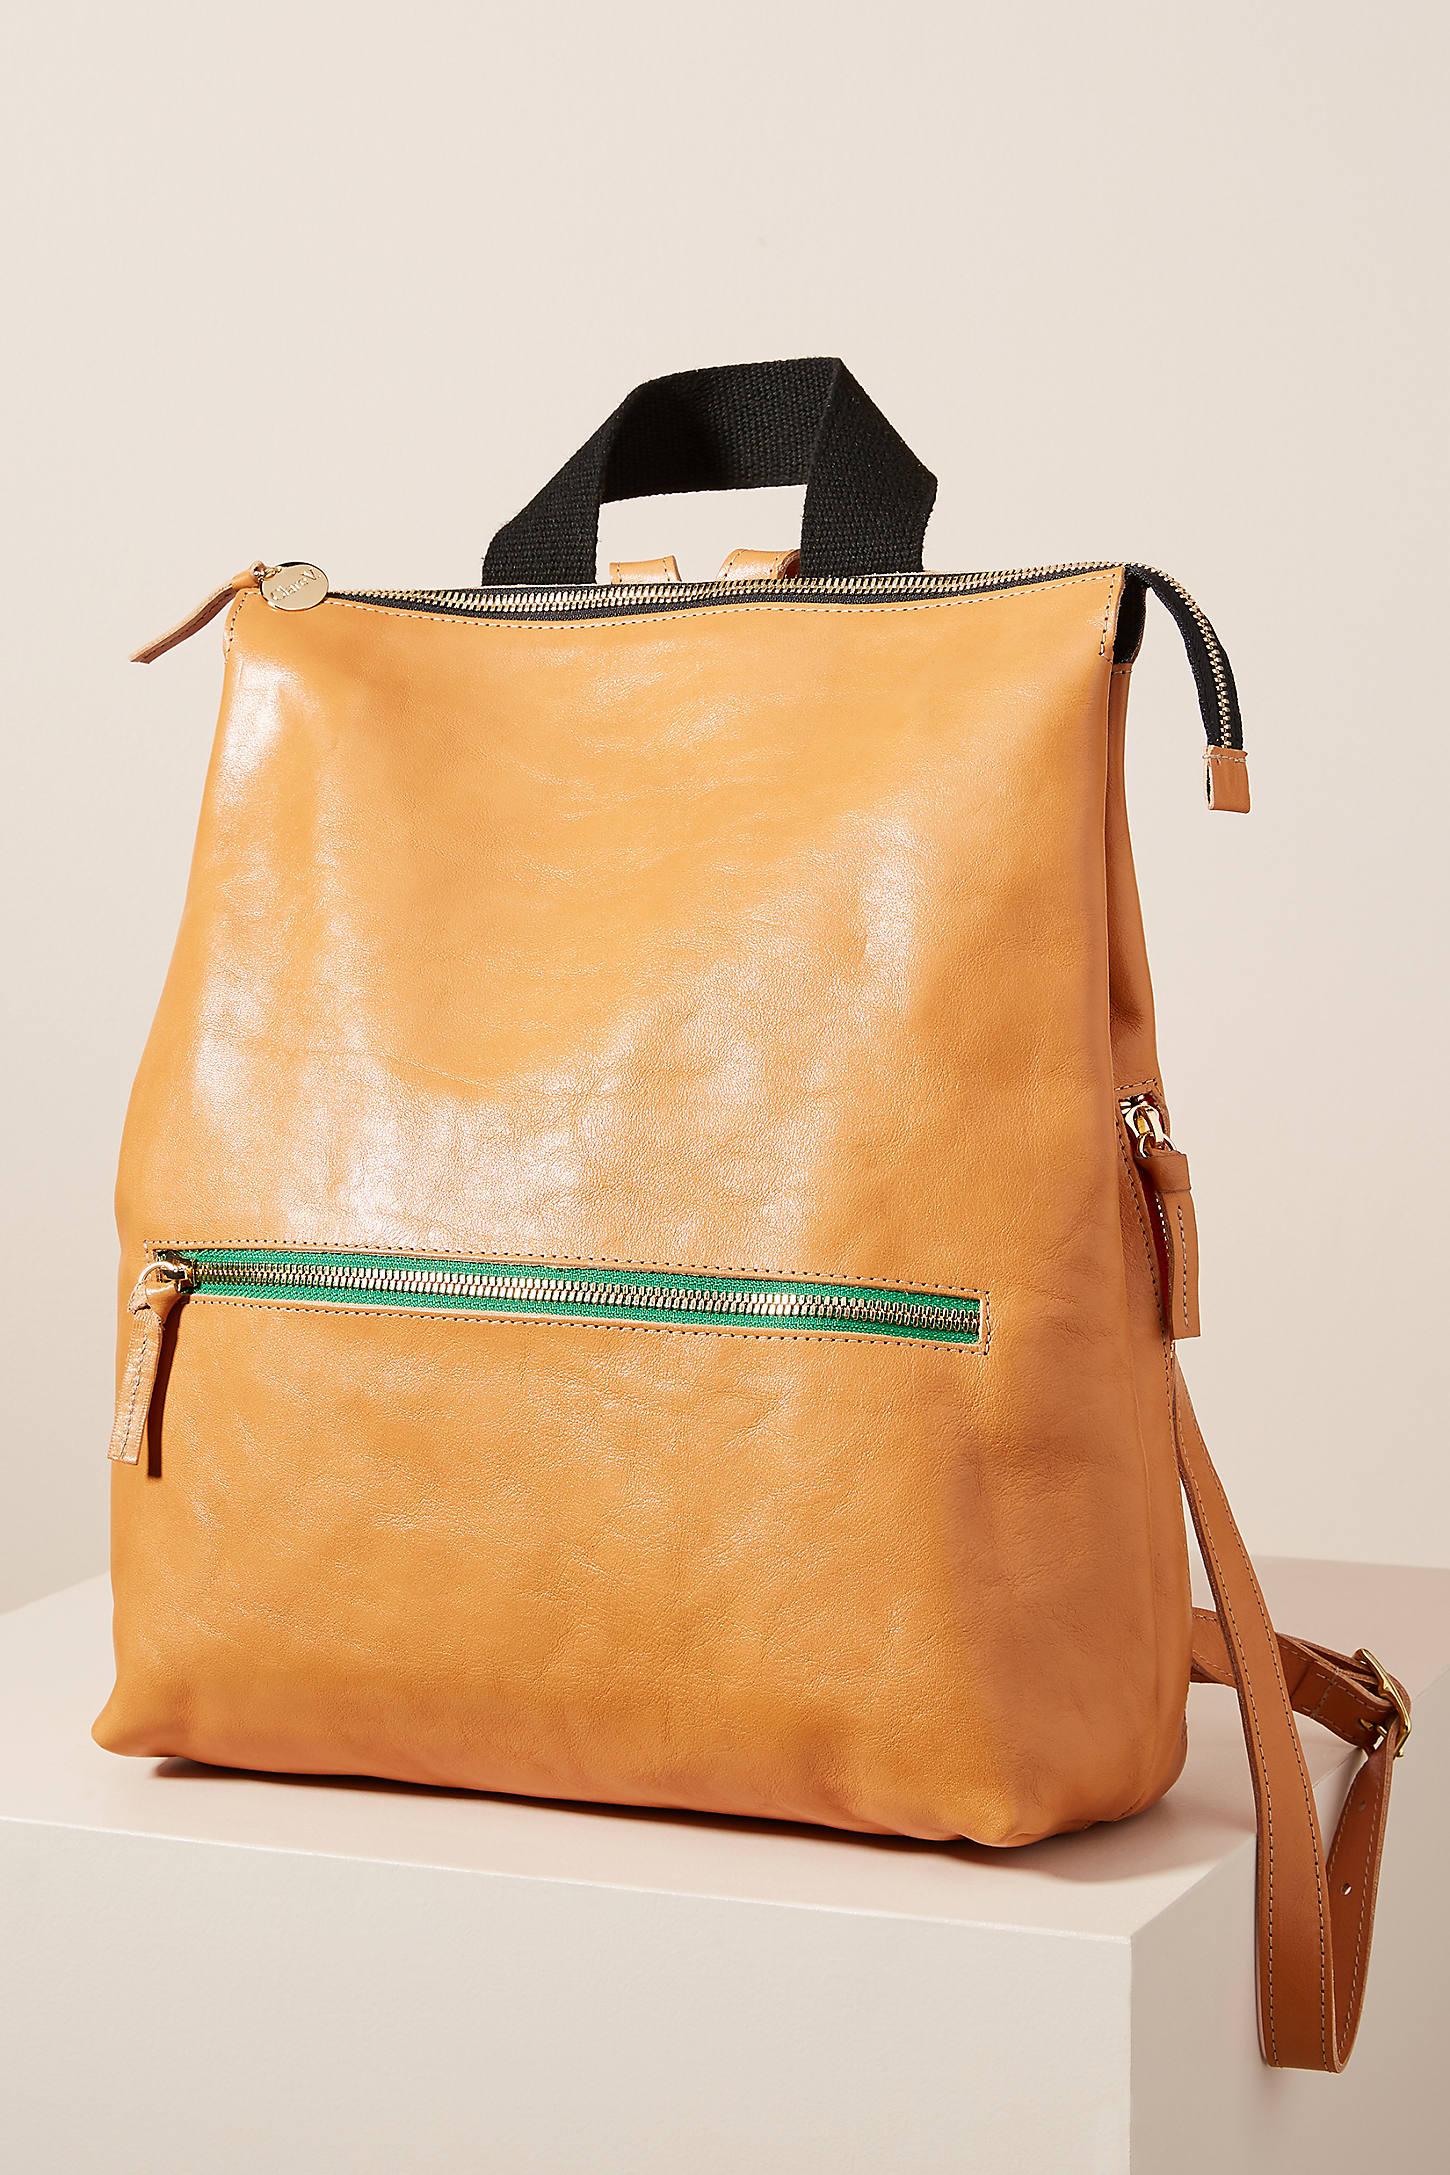 Clare V. Remi Backpack  Anthropologie Japan - Women's Clothing,  Accessories & Home